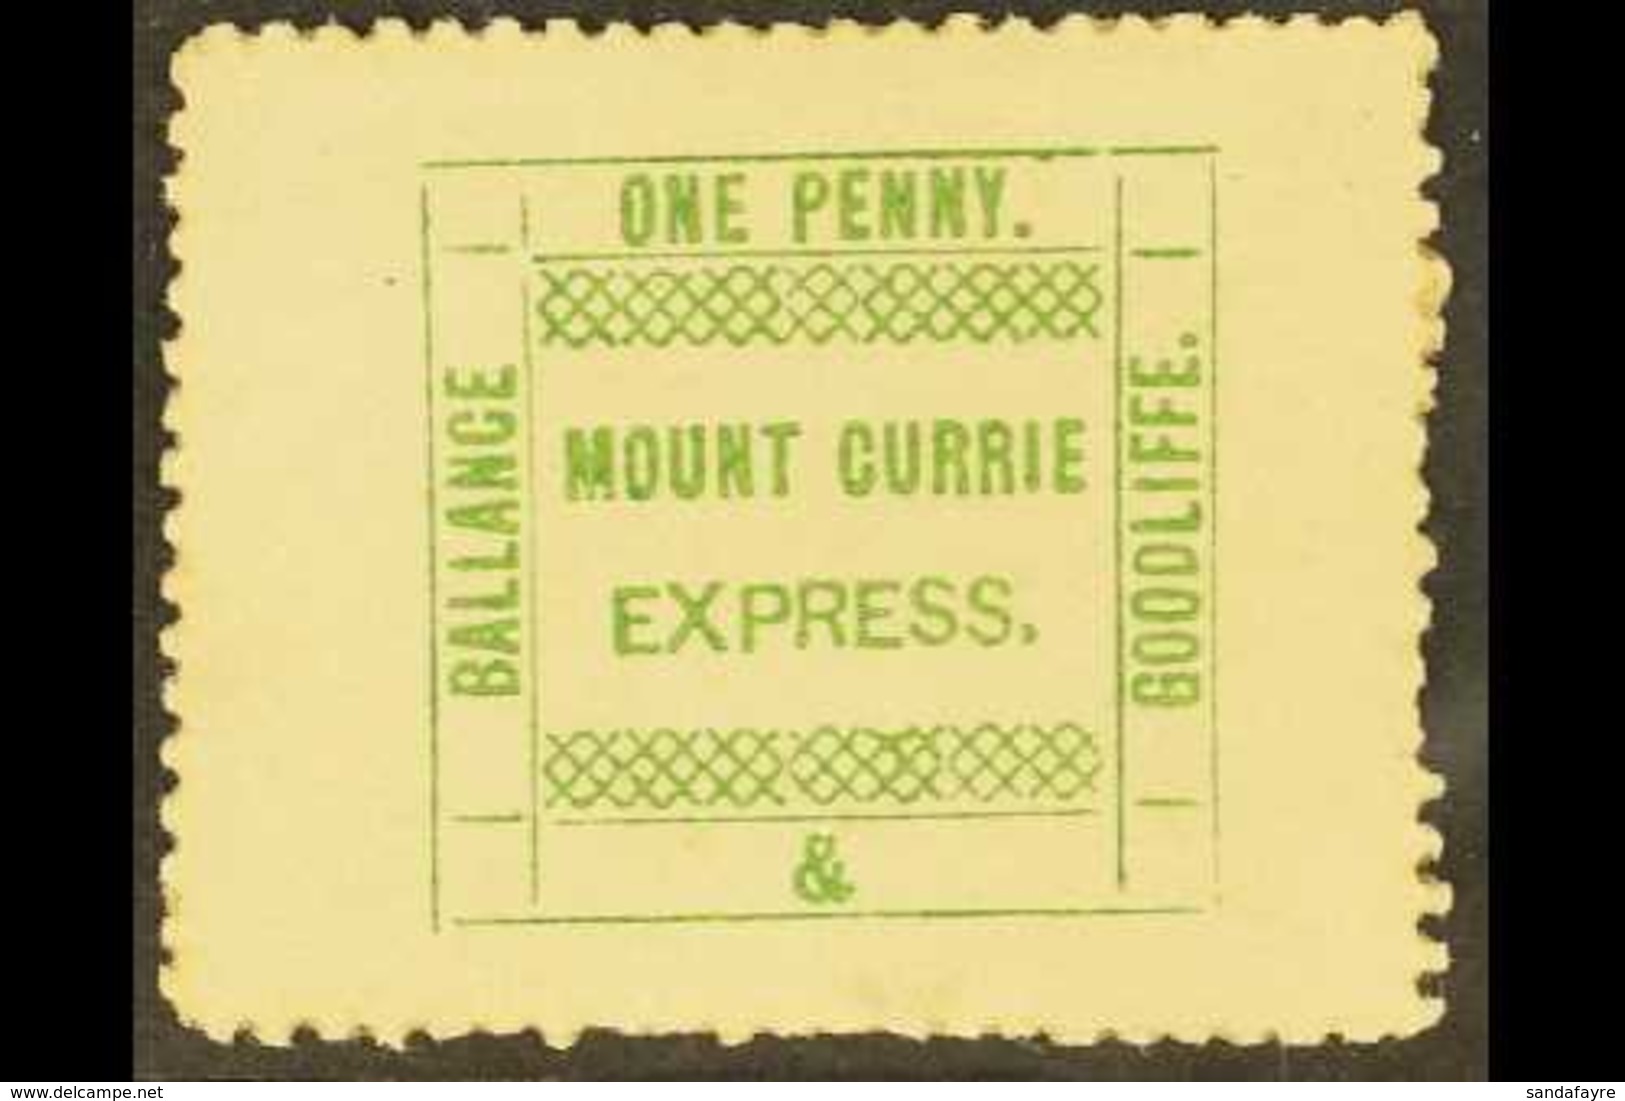 EAST GRIQUALAND - MOUNT CURRIE EXPRESS 1d Green , Ballance And Goodliffe Courier Post Stamp, Very Fine Mint Og. Extremel - Non Classés